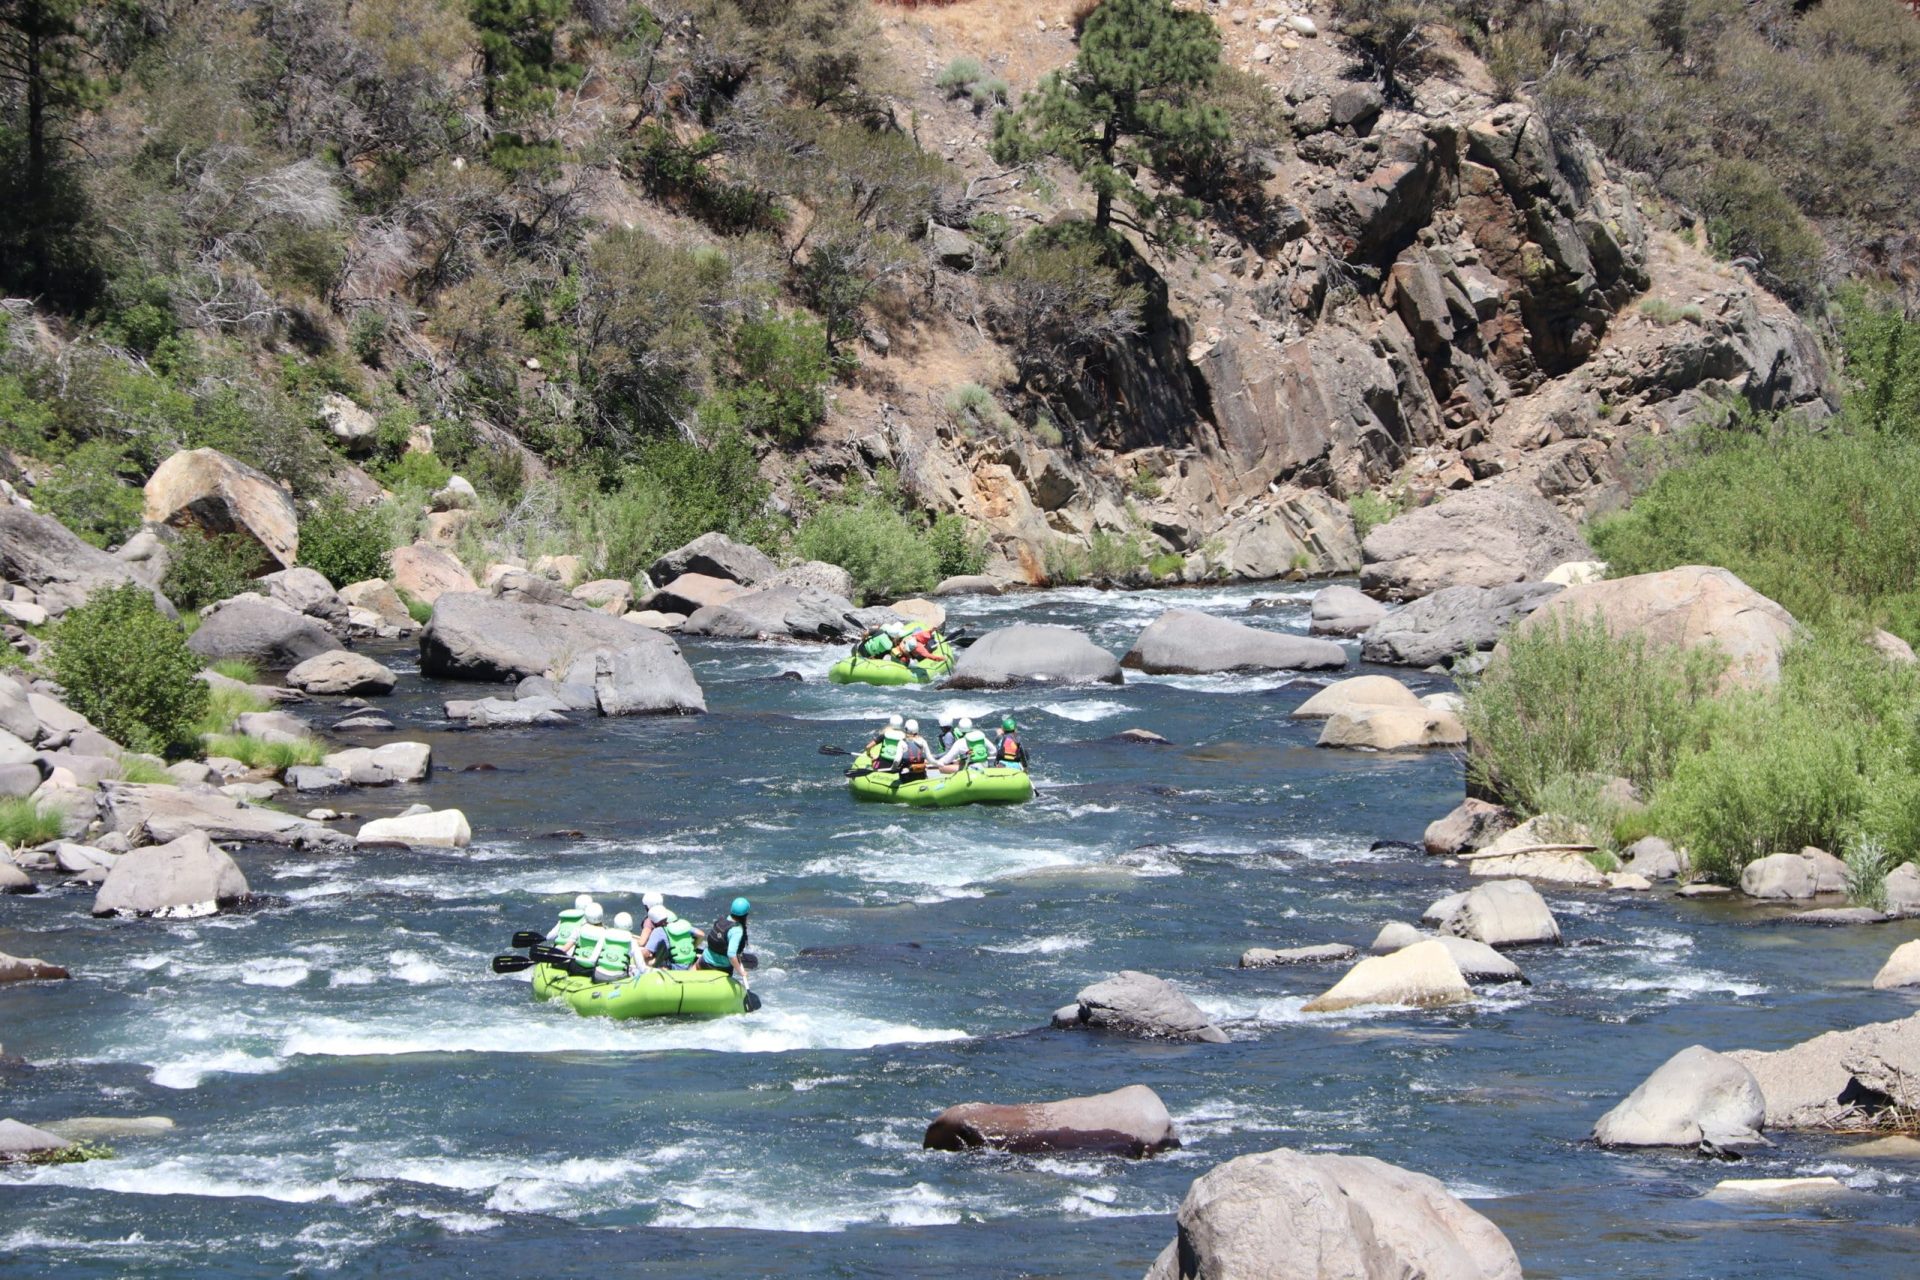 The Truckee River. Photo Credit: Tributary Whitewater